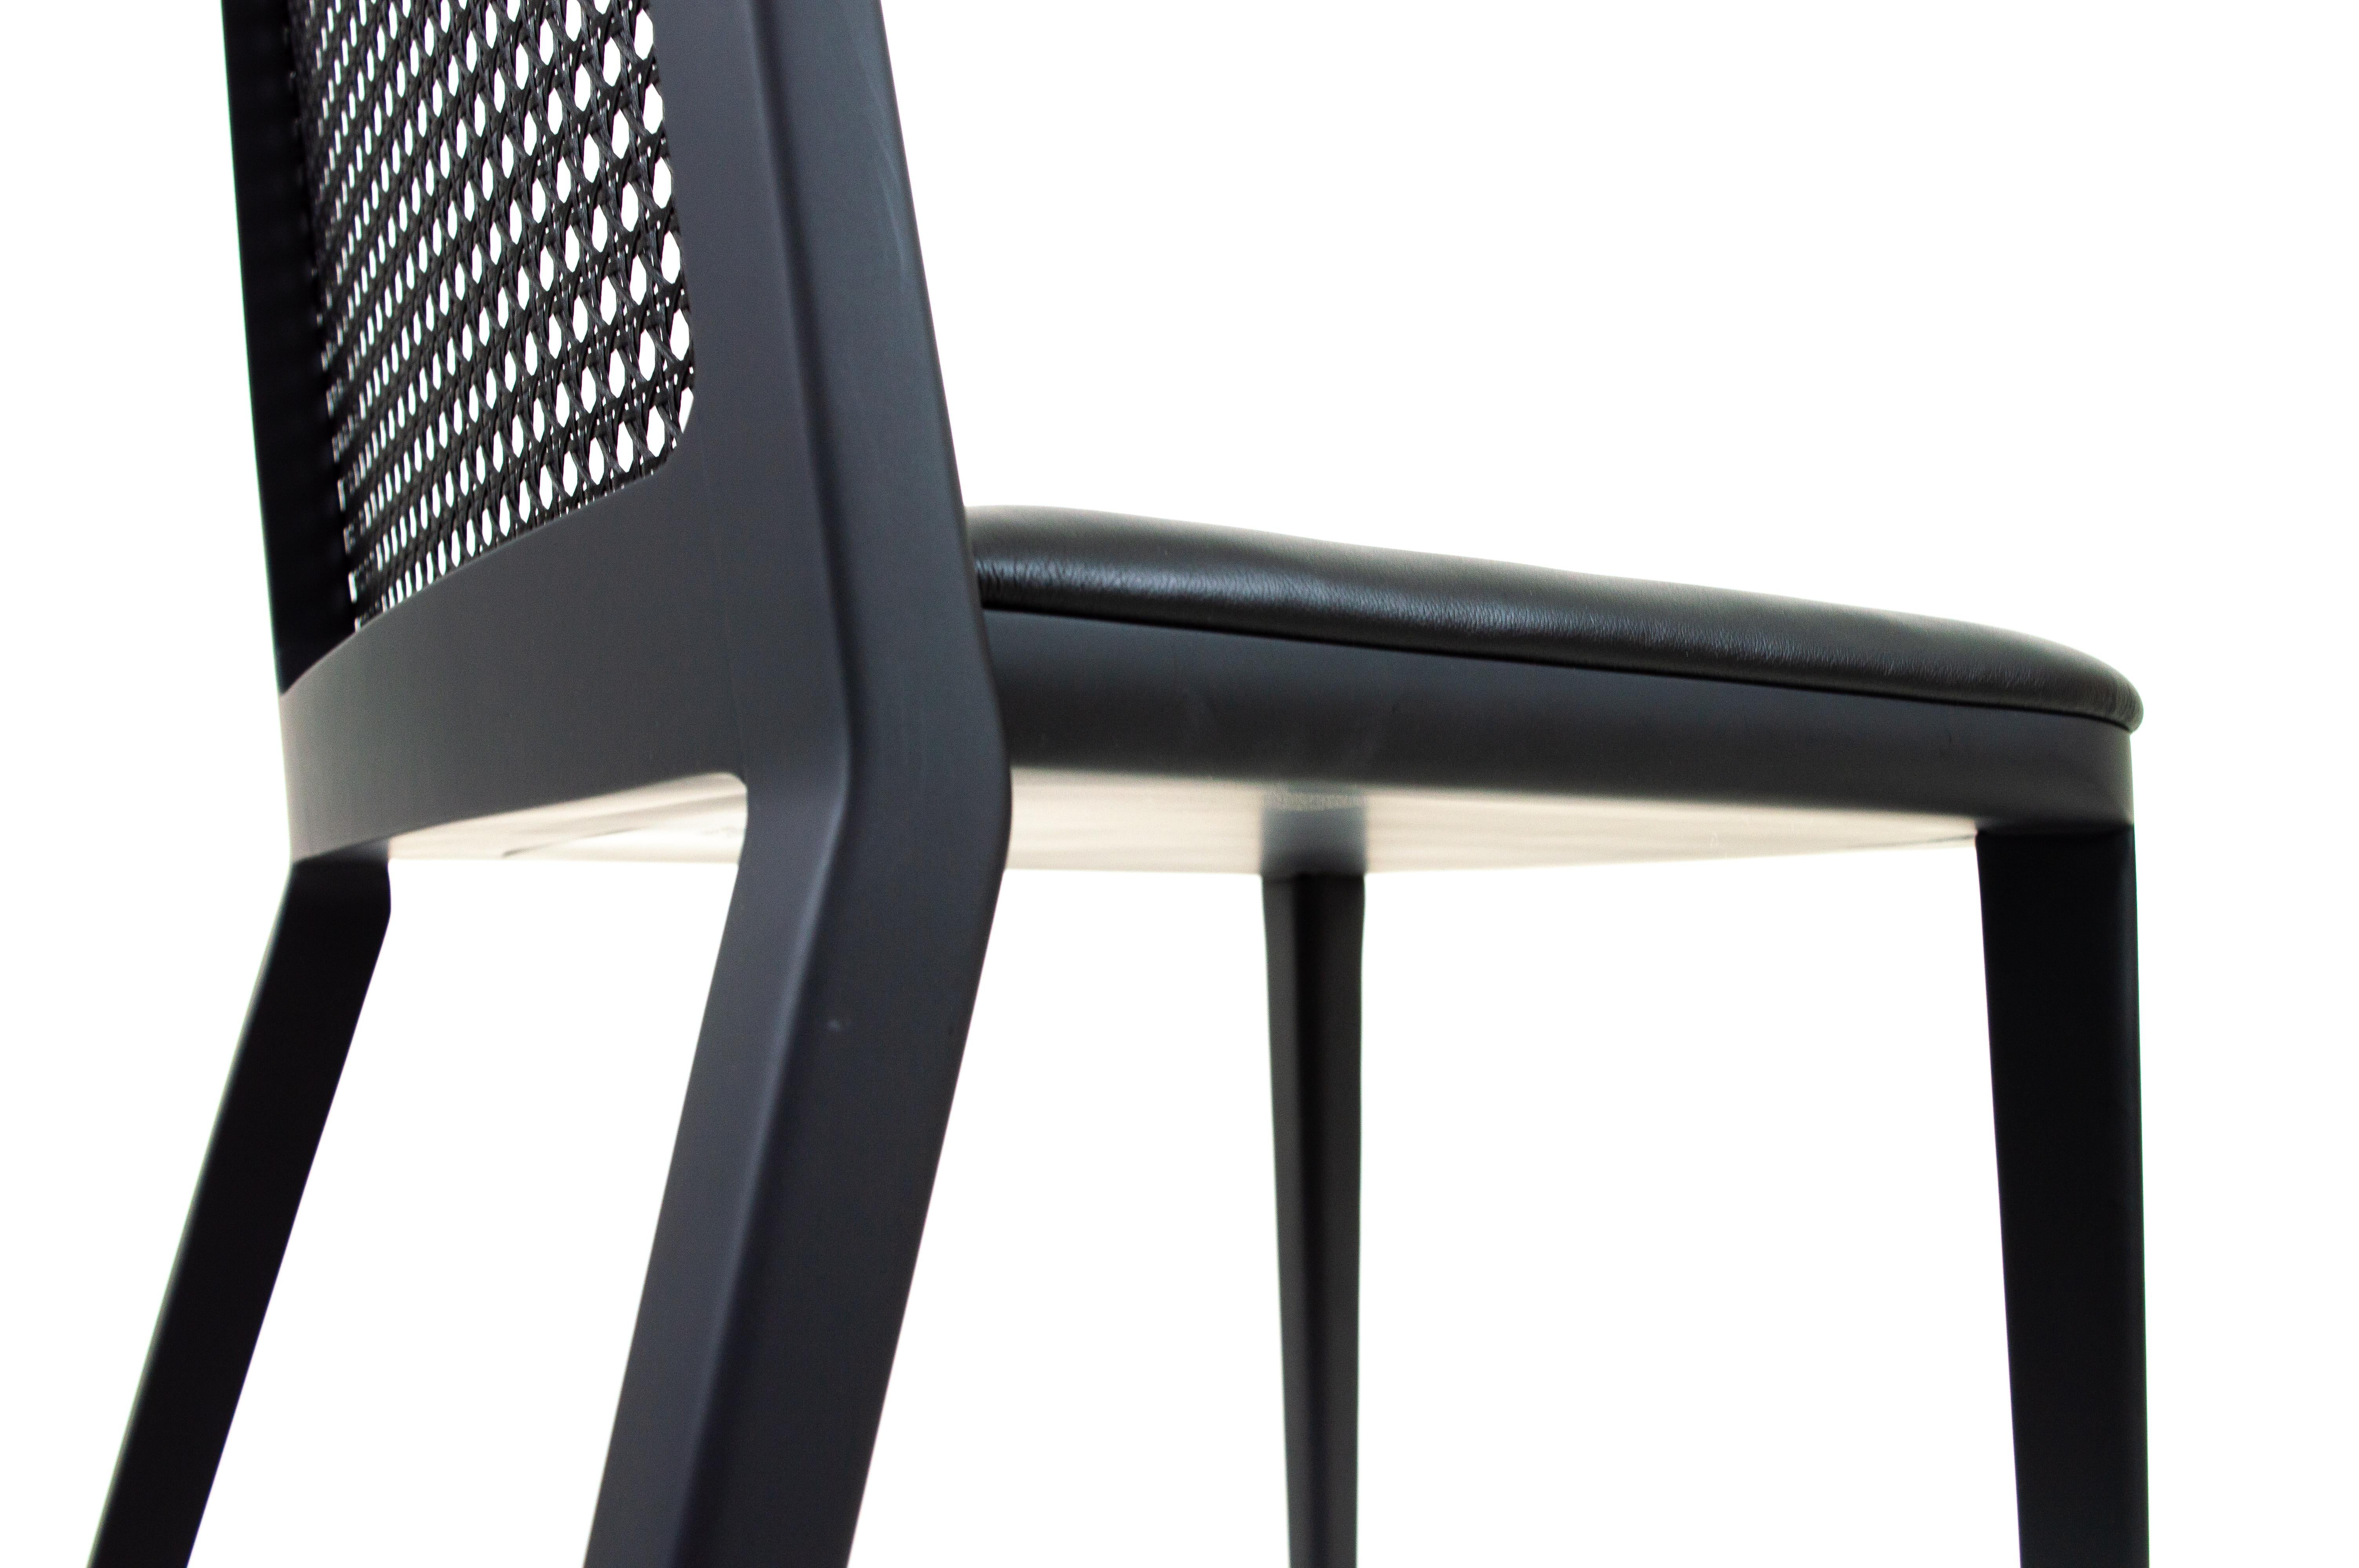 Brazilian Minimal Style, Solid Wood Chair, Leather or Textile Seating, Caning Backboard For Sale